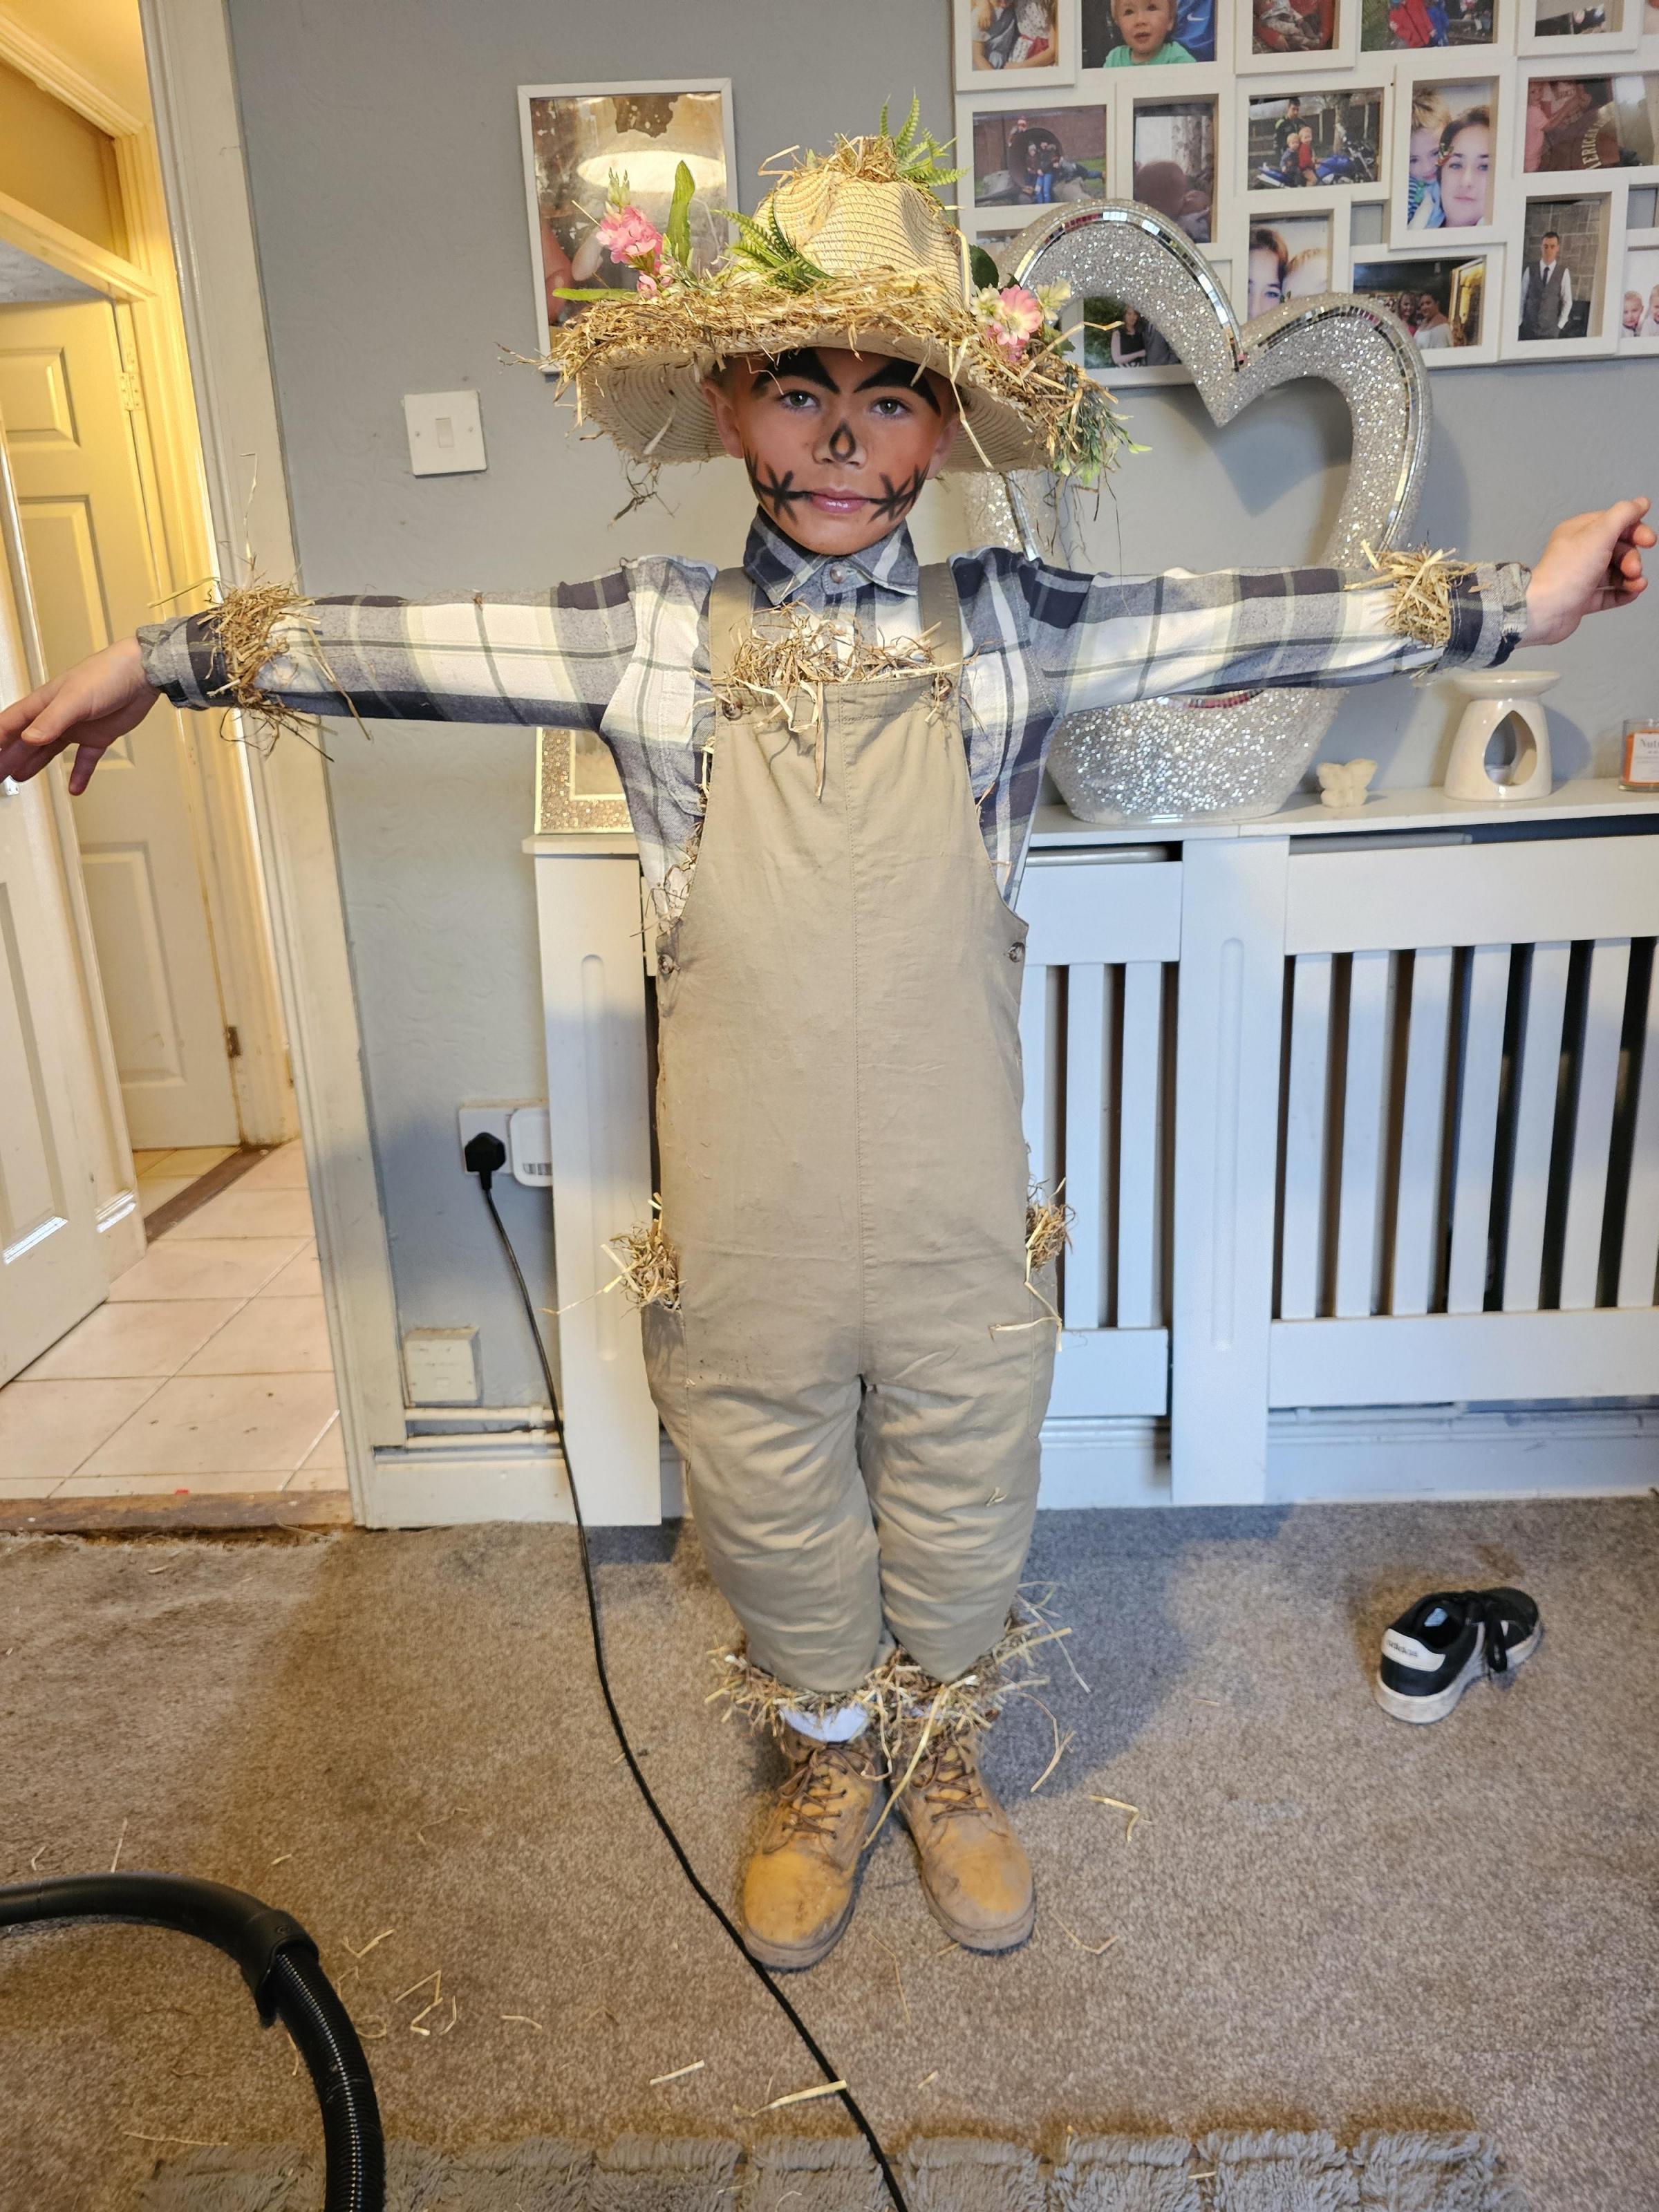 Nine-year-old Harry Kettlewell from Winsford as Scarecrow from Scarecrow Weddings